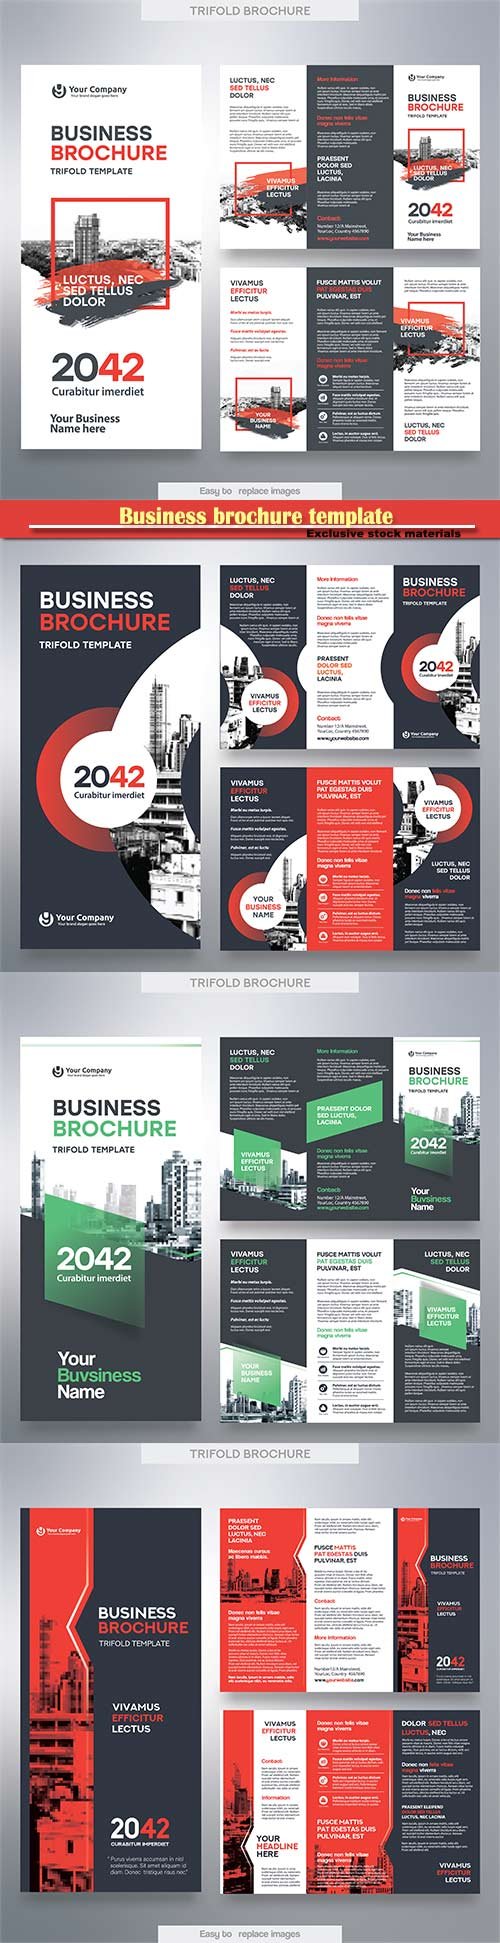 Business brochure template in tri fold layout vector design